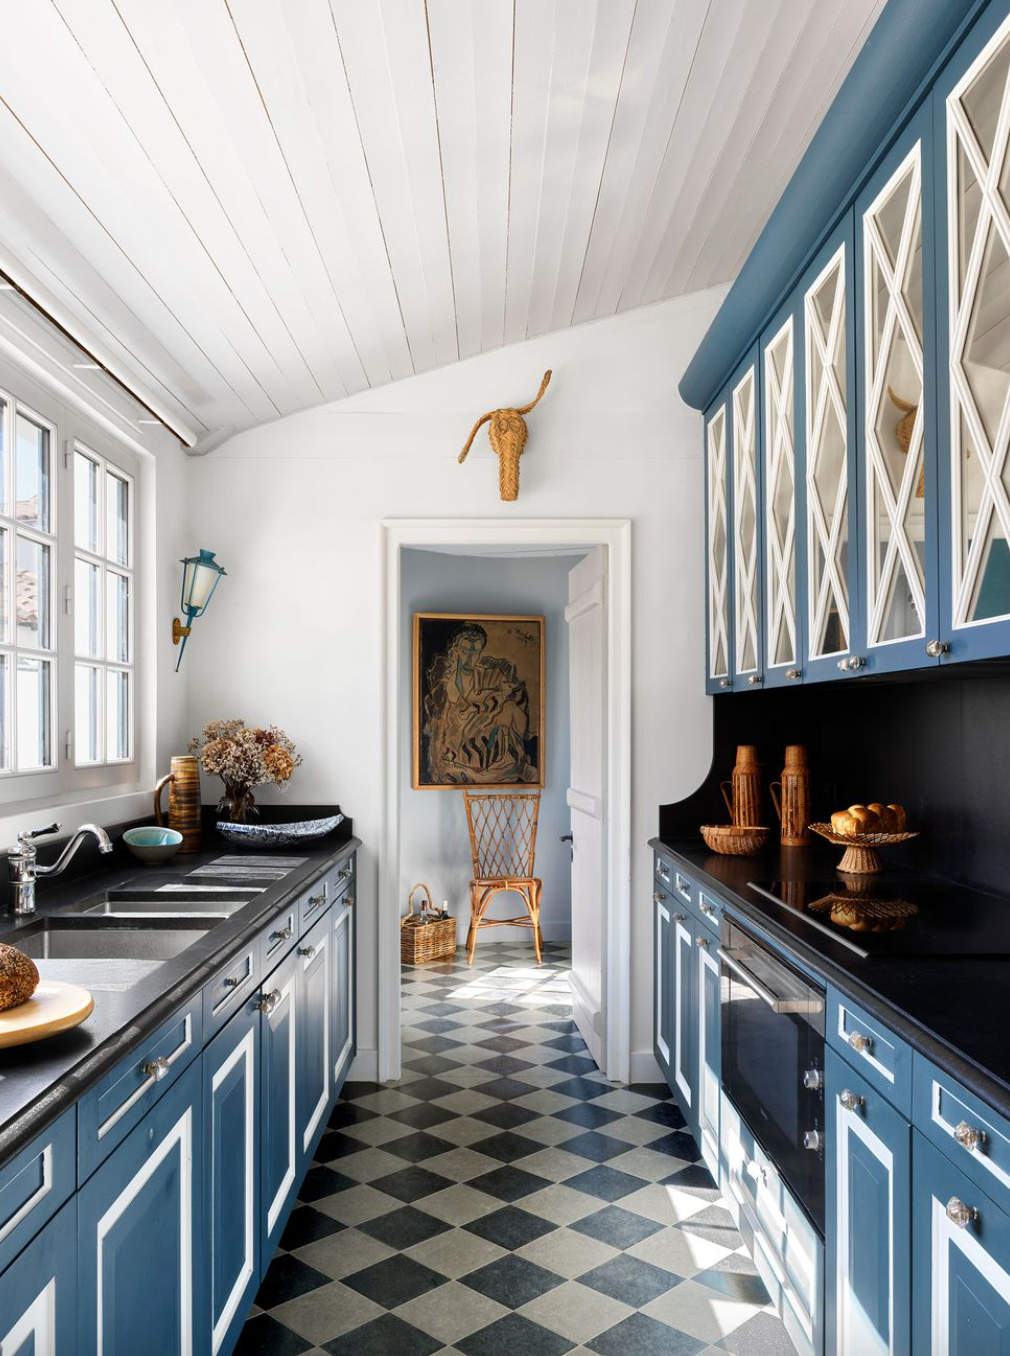 18 Galley Kitchens That Will Make You Want to Downsize